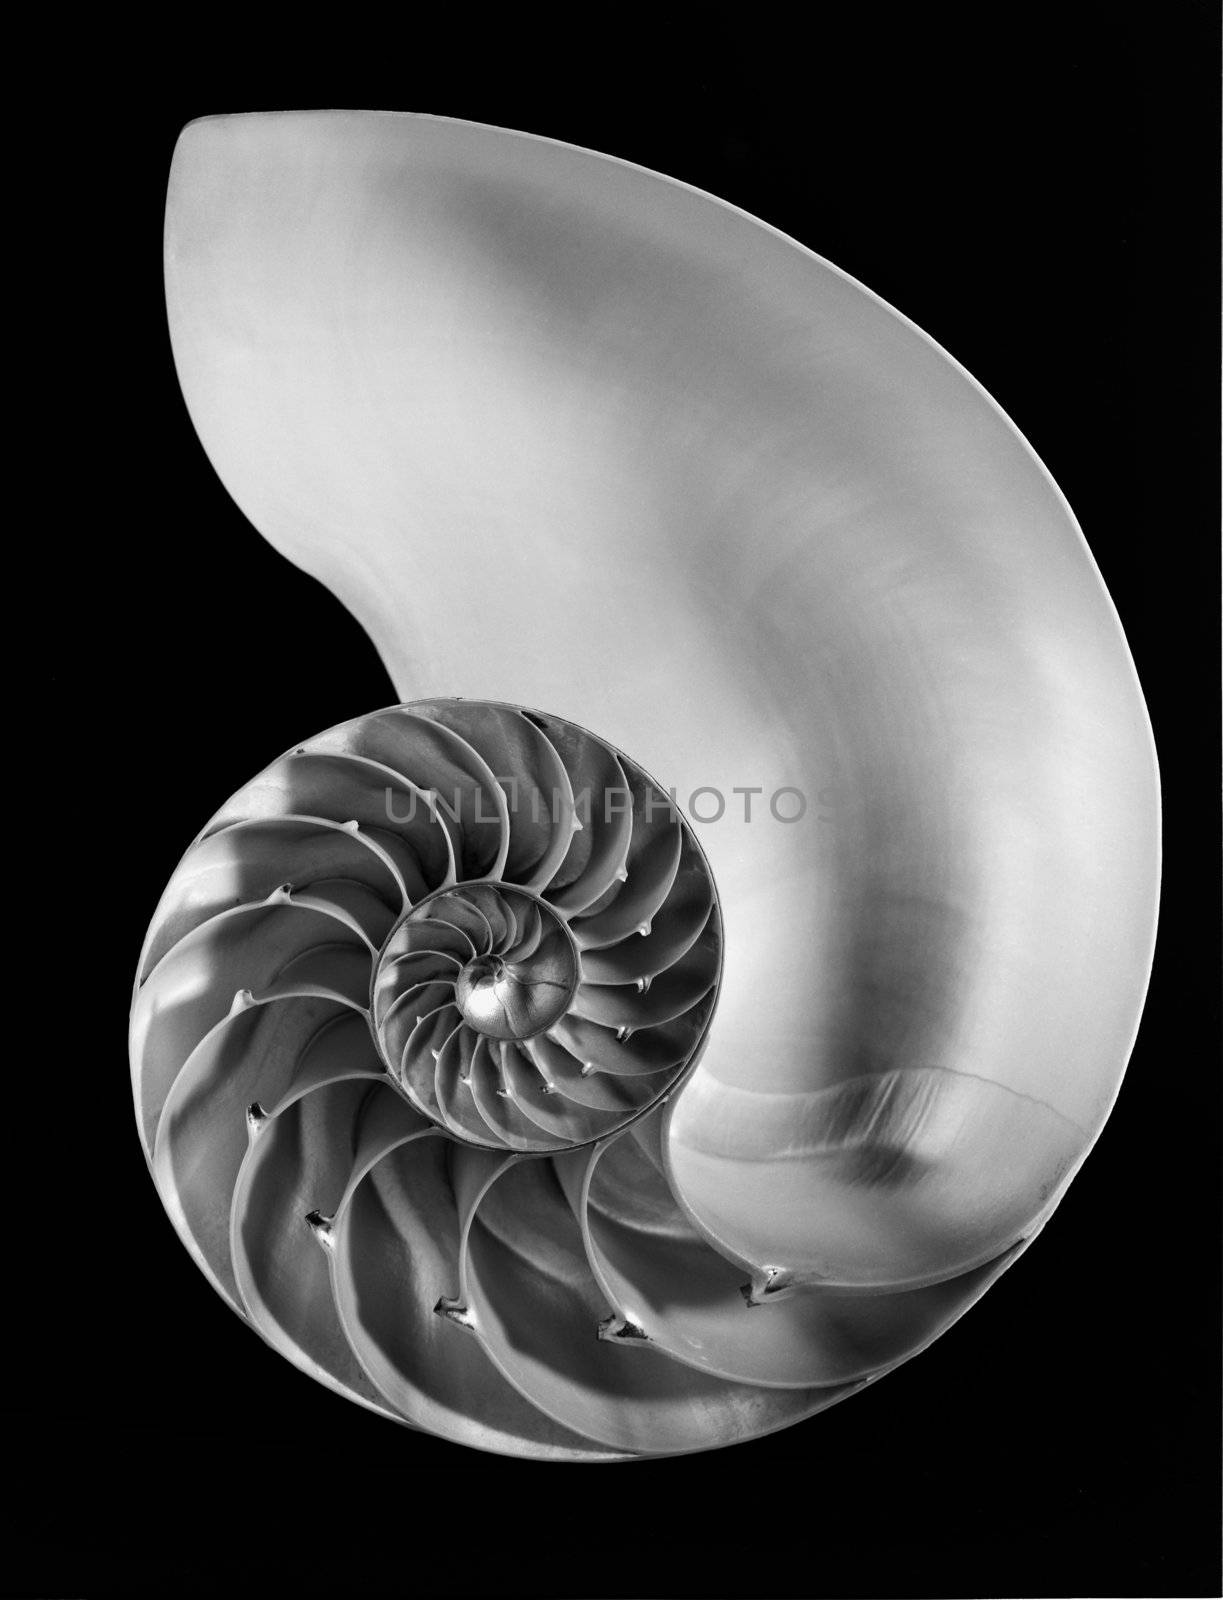 Nautilus shell in black and white ,cut in half to show interior